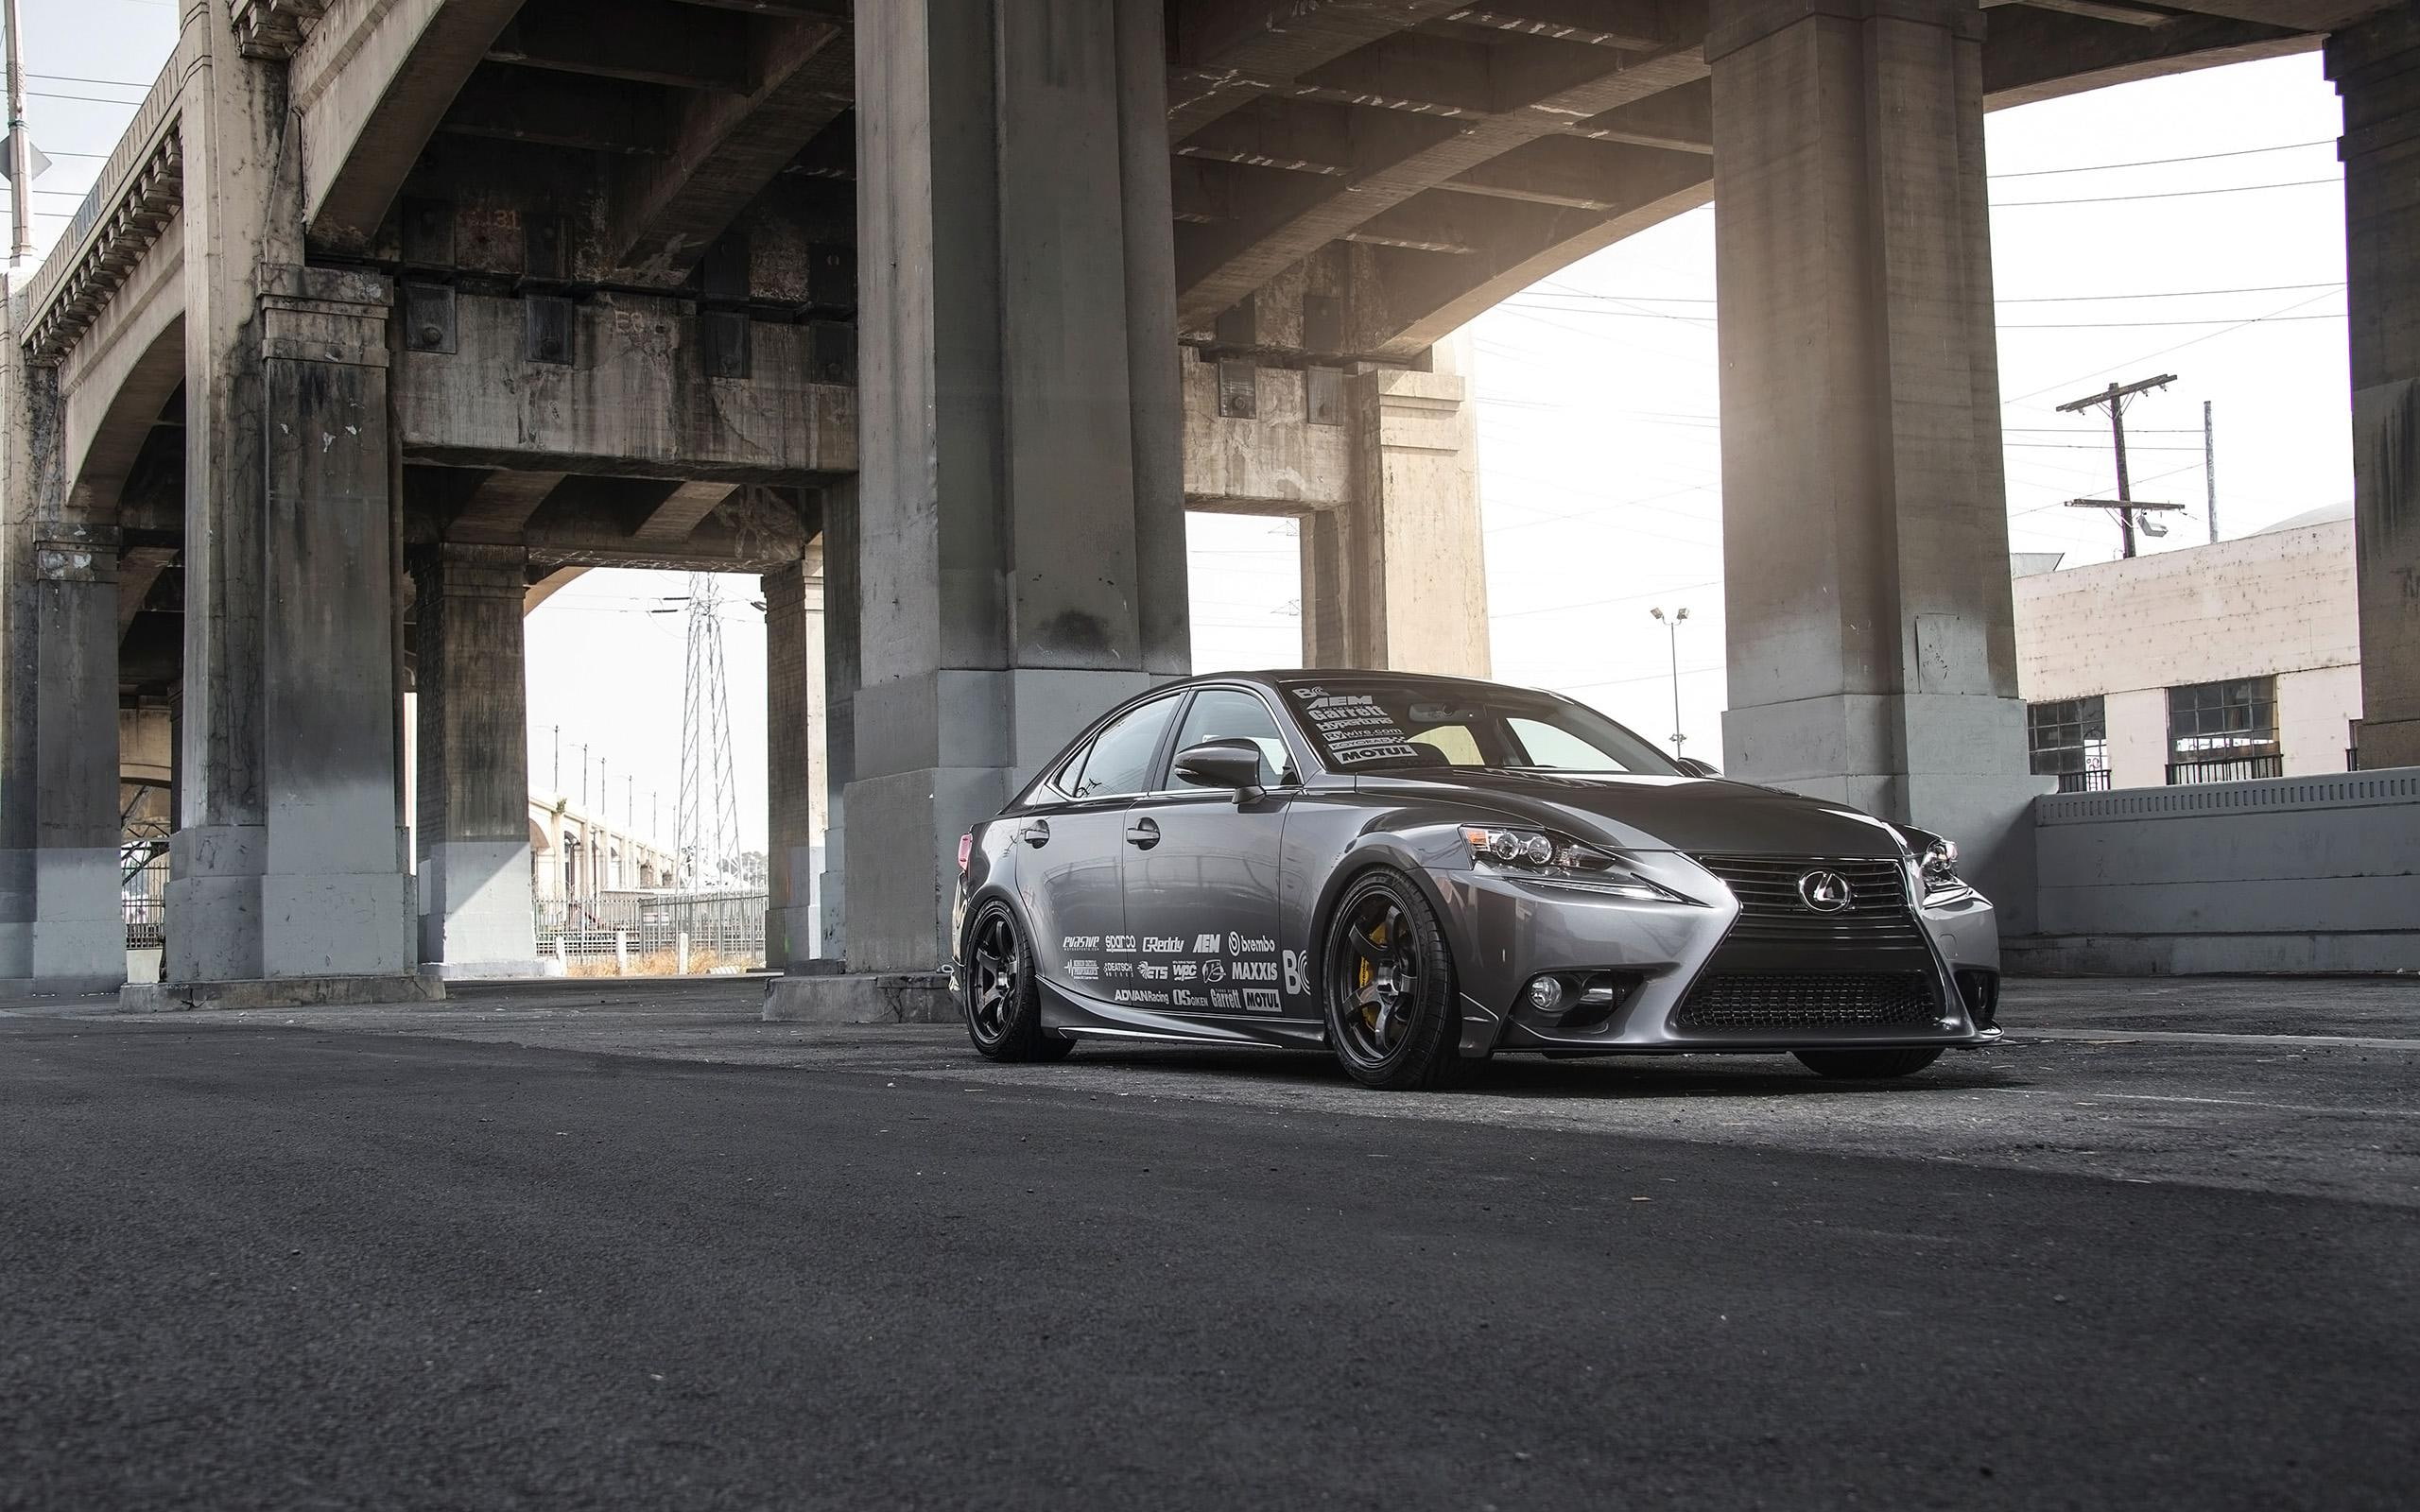 2014 Lexus IS 340 by Philip Chase, silver and black sedan, cars